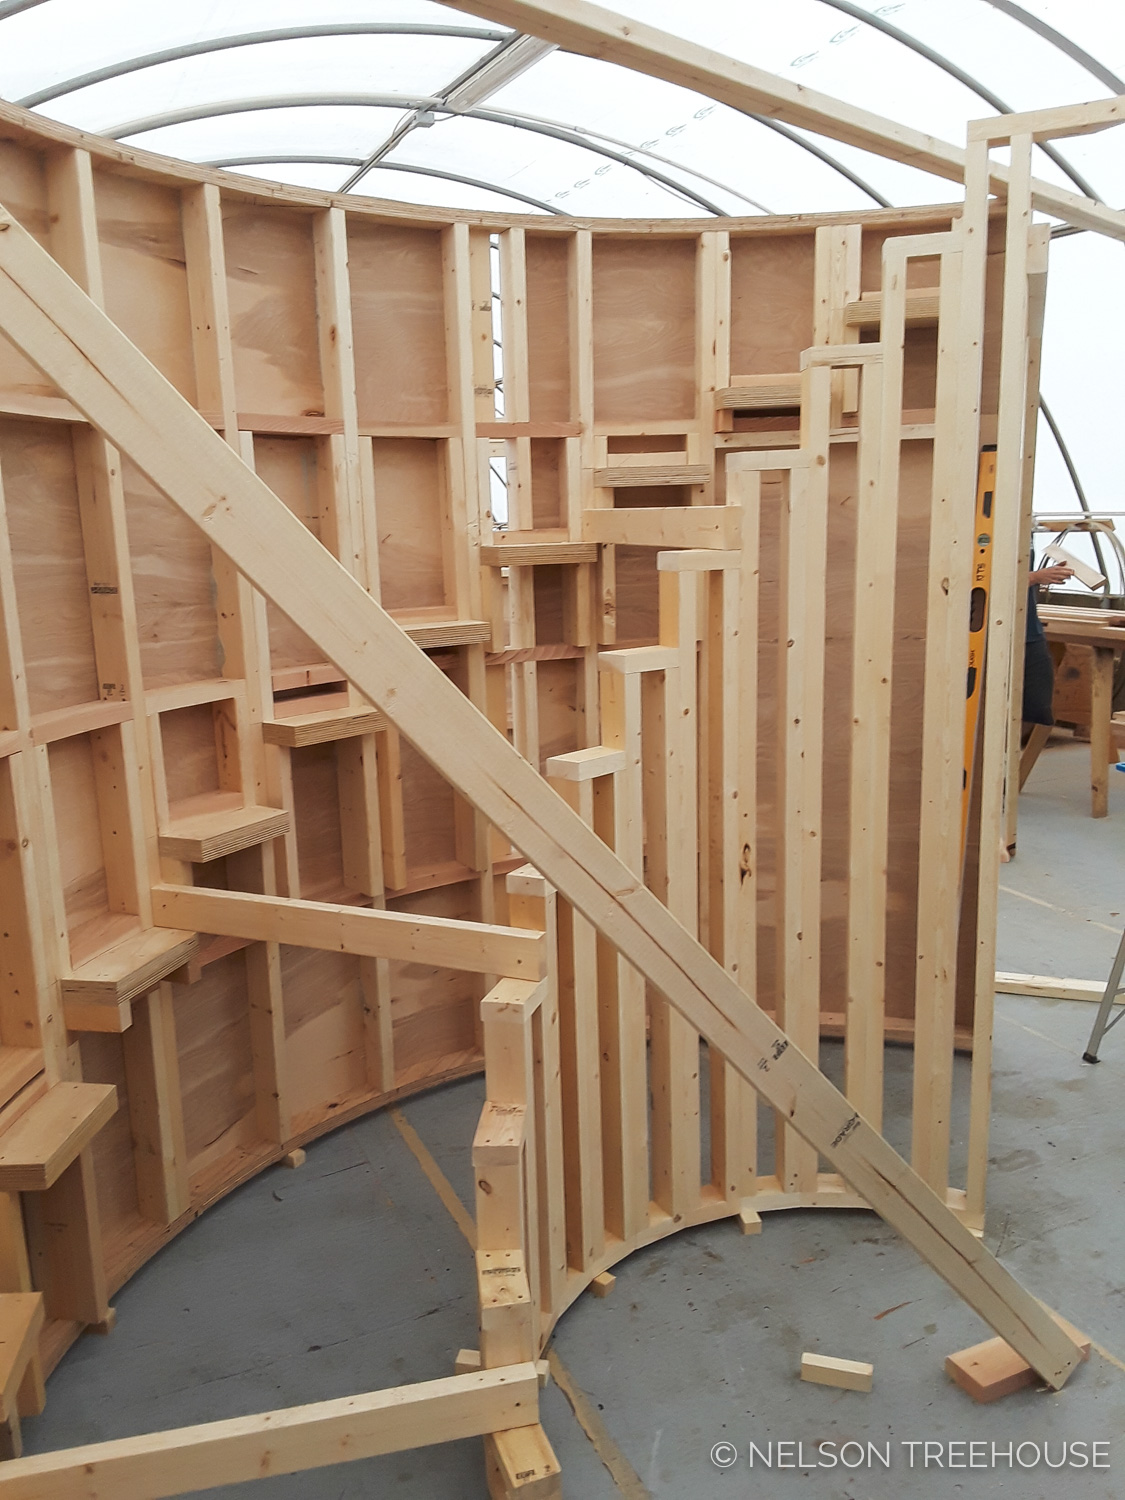  Spiral Staircase mocked up inside the prefab shop 